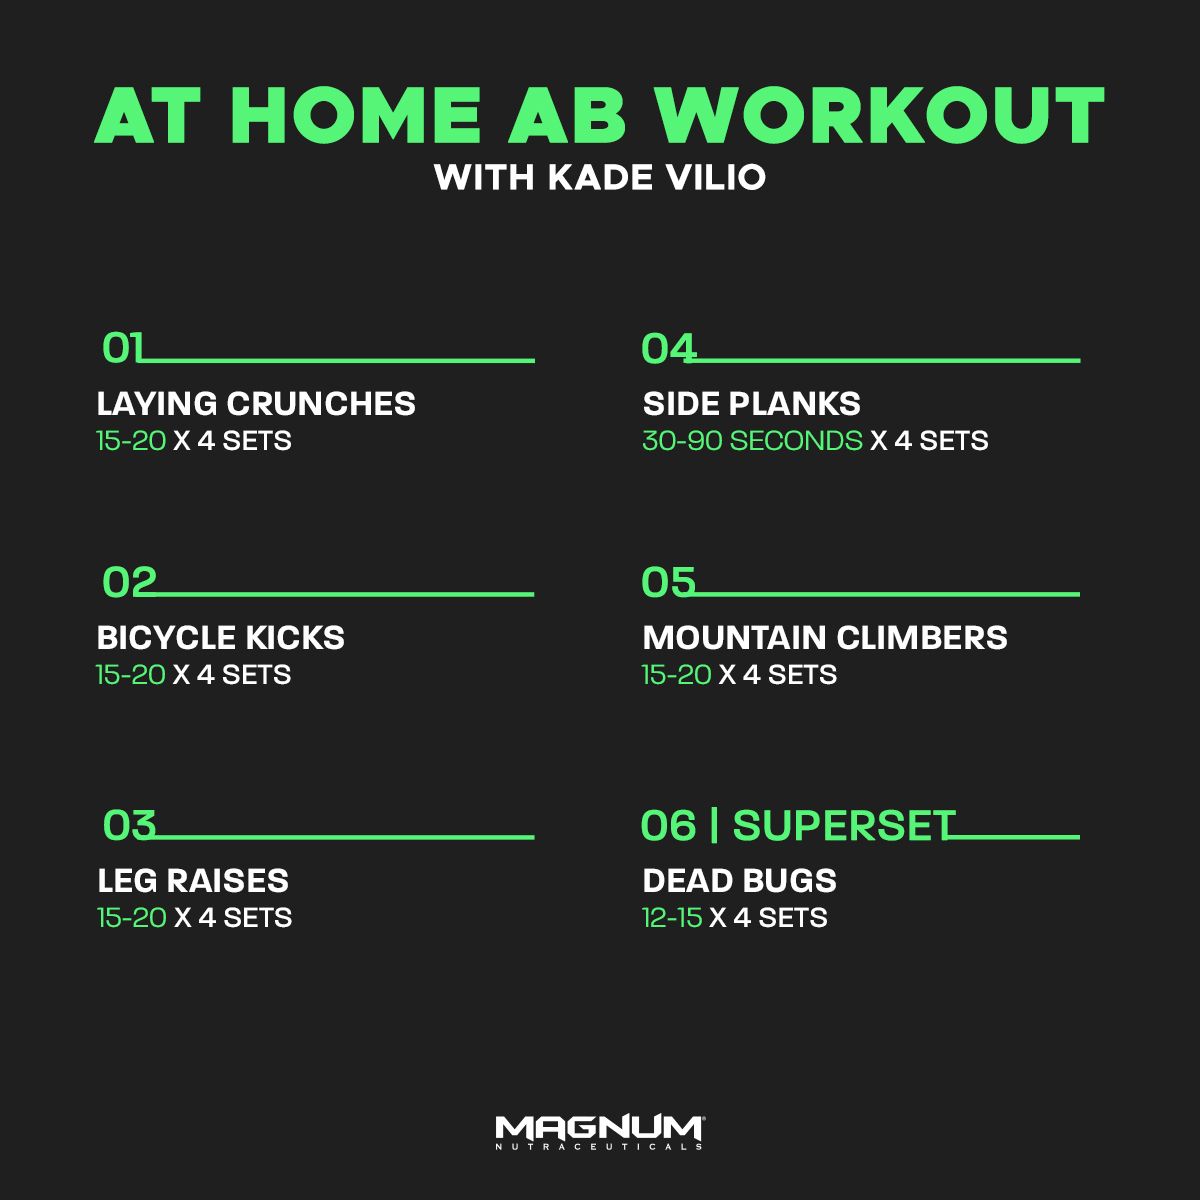 No gym, no problem! ⬇️

Save this abs-olutely killer home workout from Magnum Athlete, Kade!

Tag a fit buddy to try this with 💪 

#MagnumSupps #WorkoutWednesday
#magnumnutraceuticals #absathome #absworkouts #workoutinspiration #workoutideas #workoutoftheday #humpdayworkout